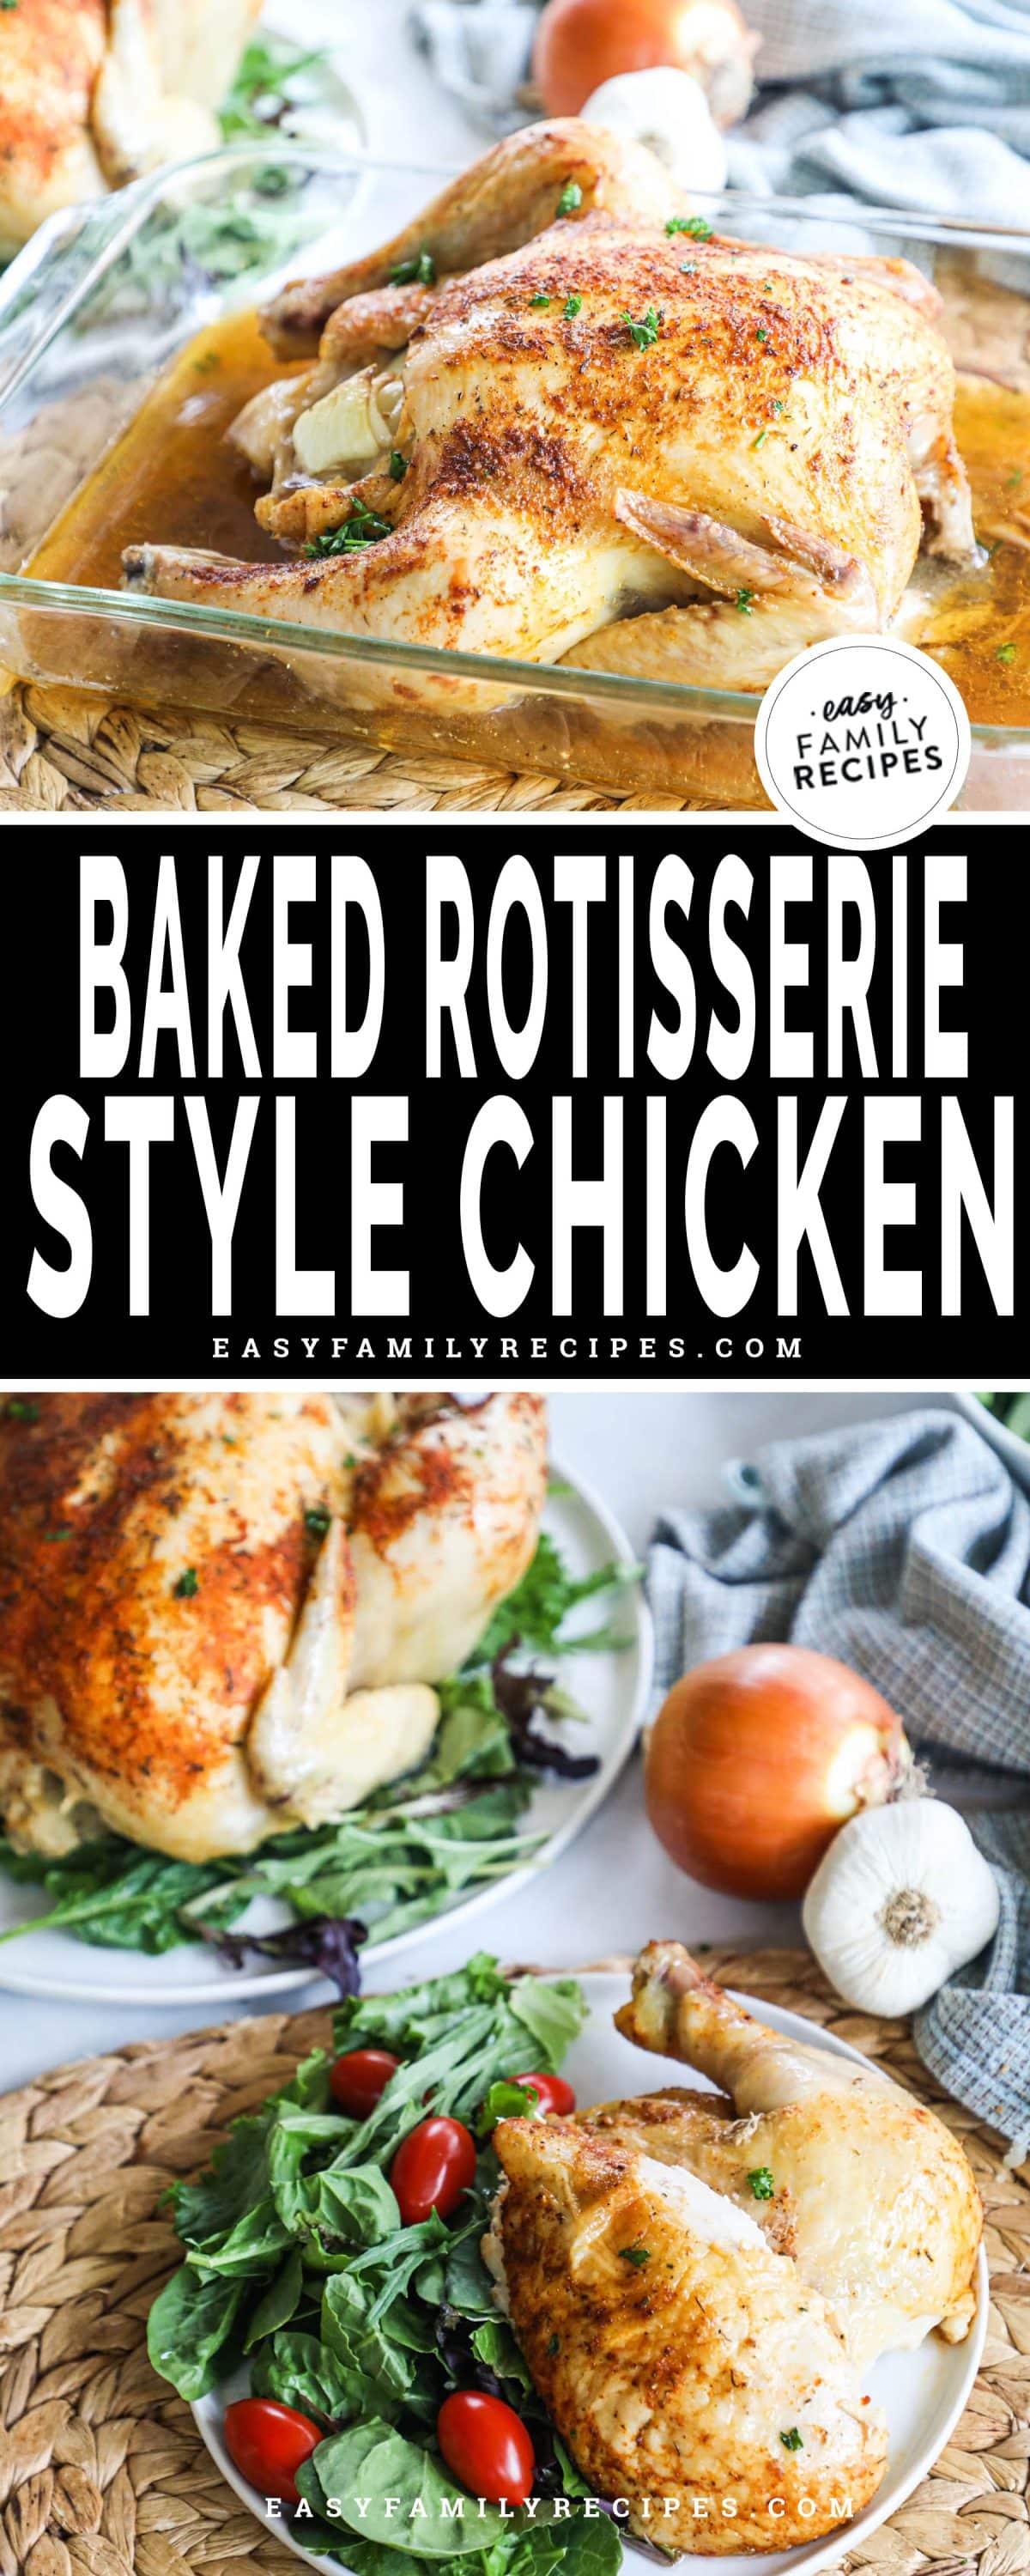 an oven roasted chicken seasoned rotisserie style served with salad.